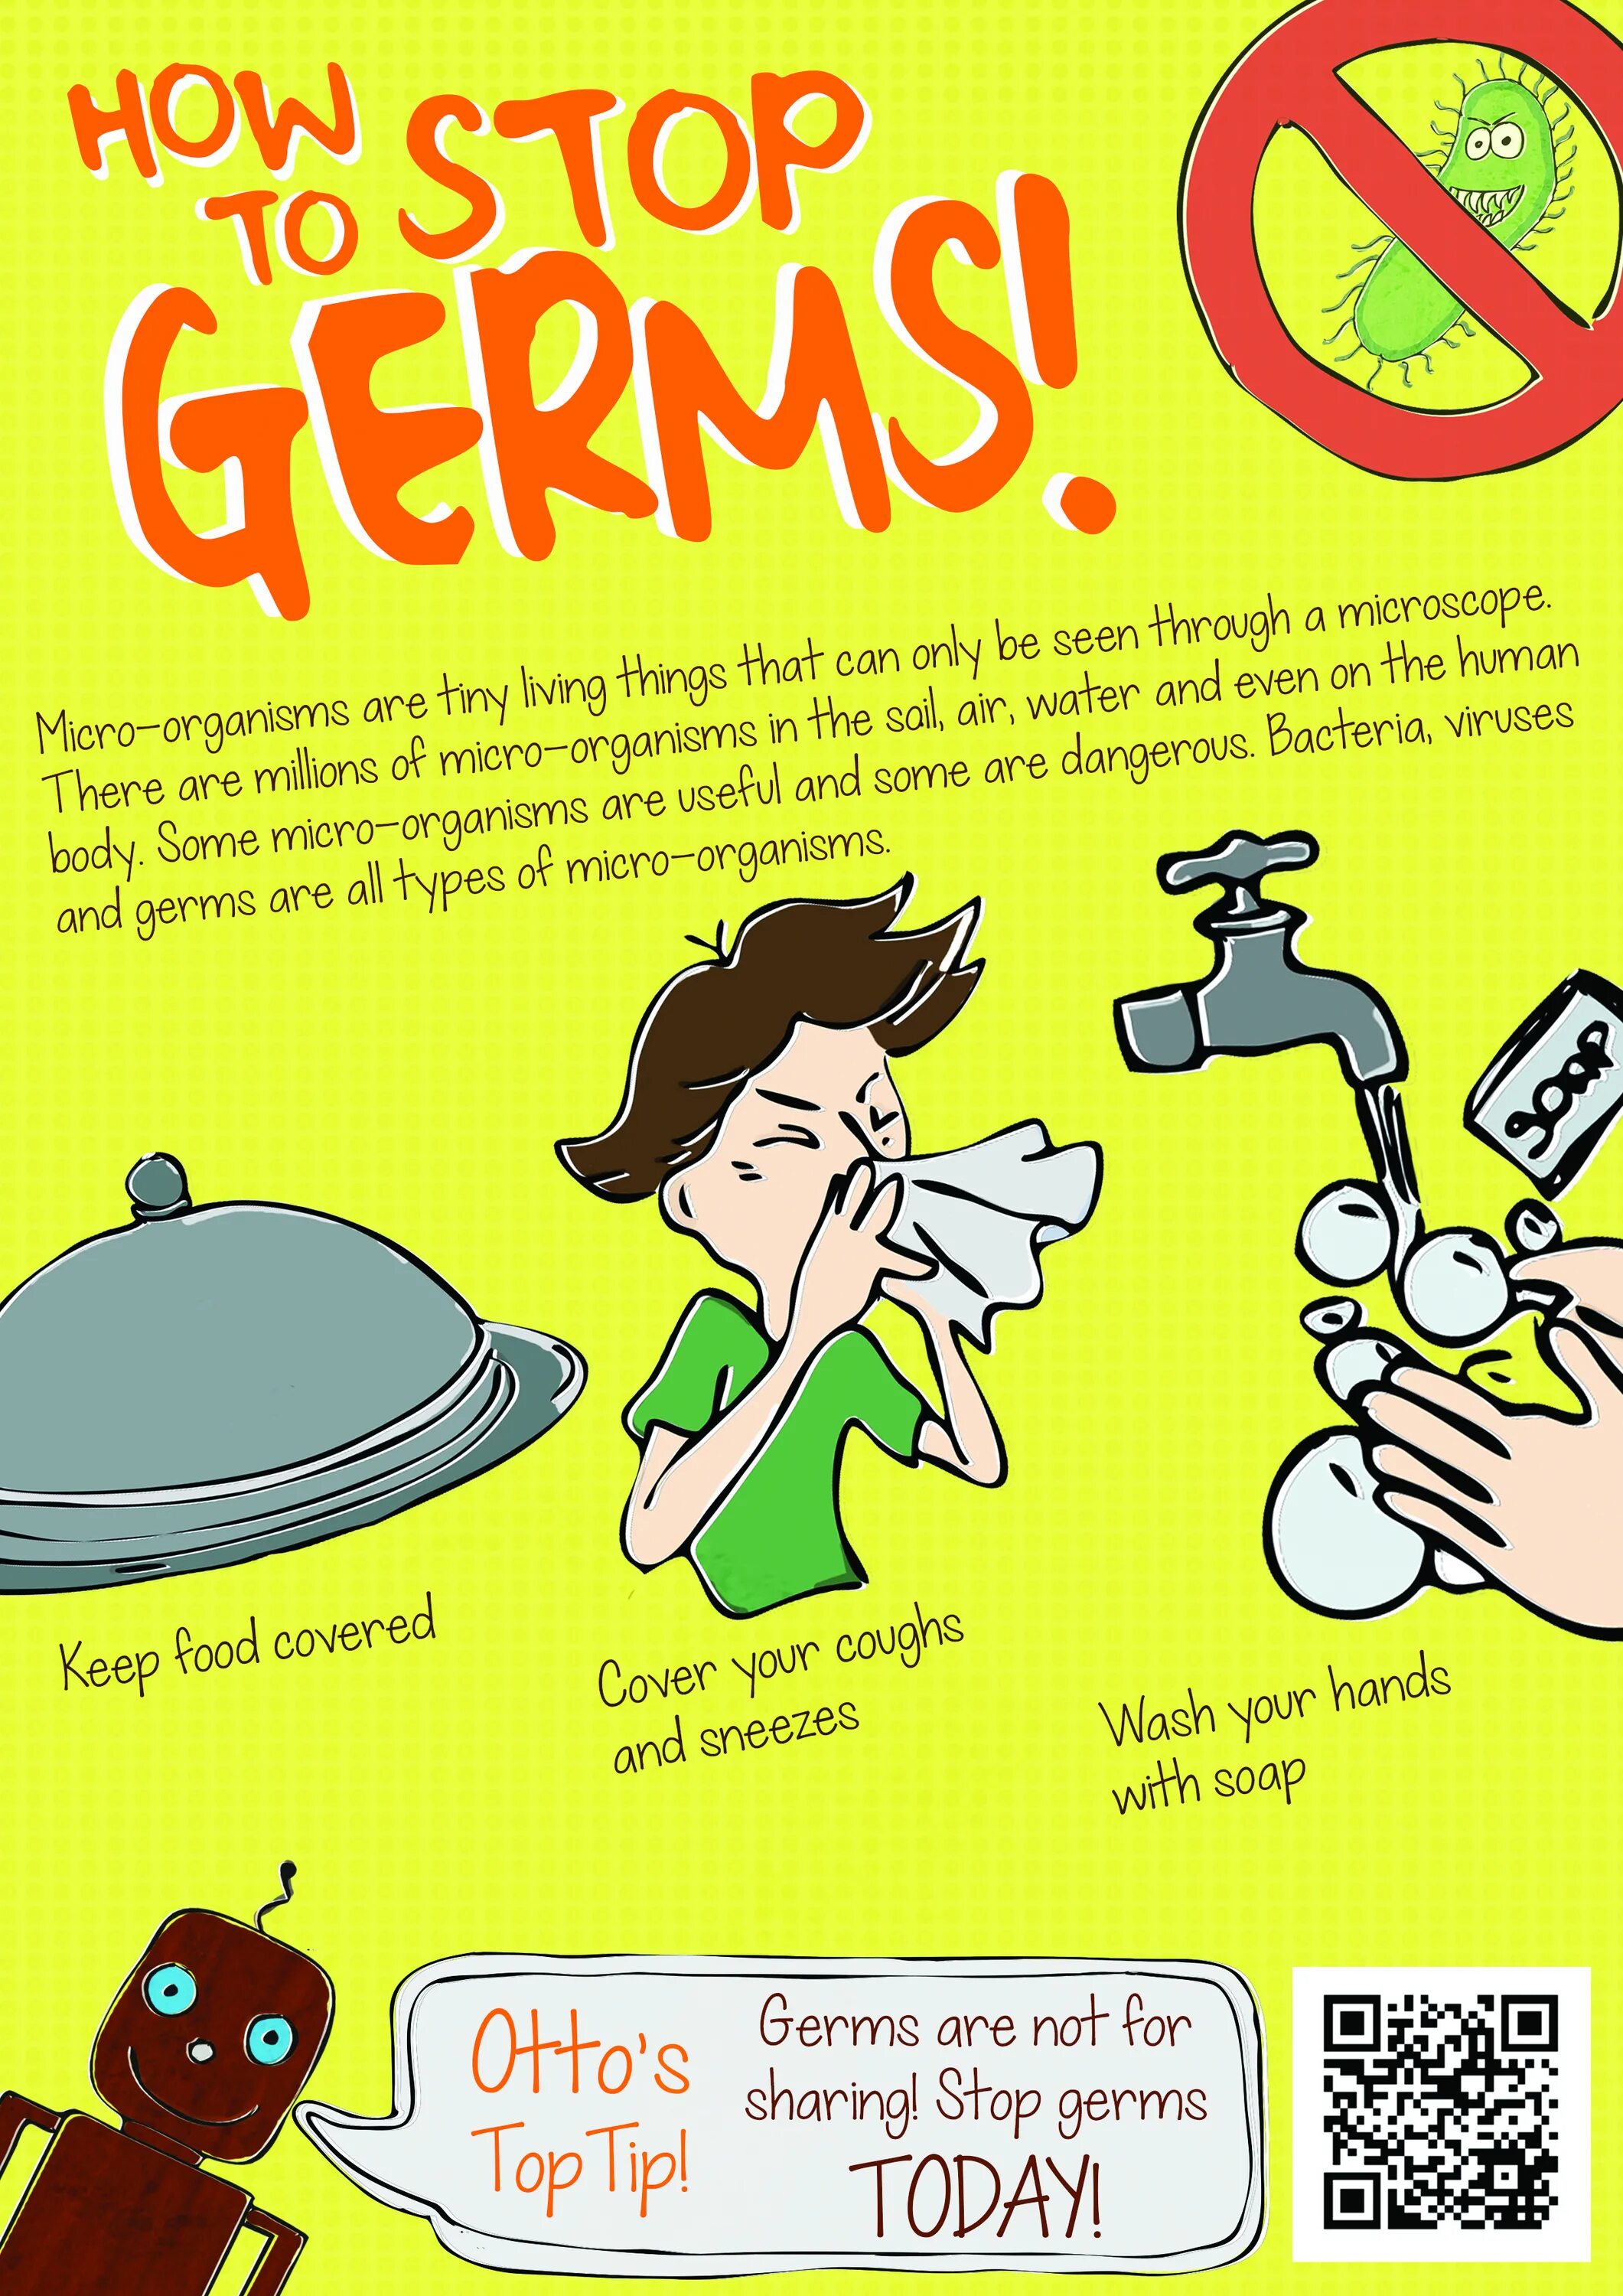 Germs 1999 игра. About Germs. How to stop Germs poster. What are Germs? Книга цена.